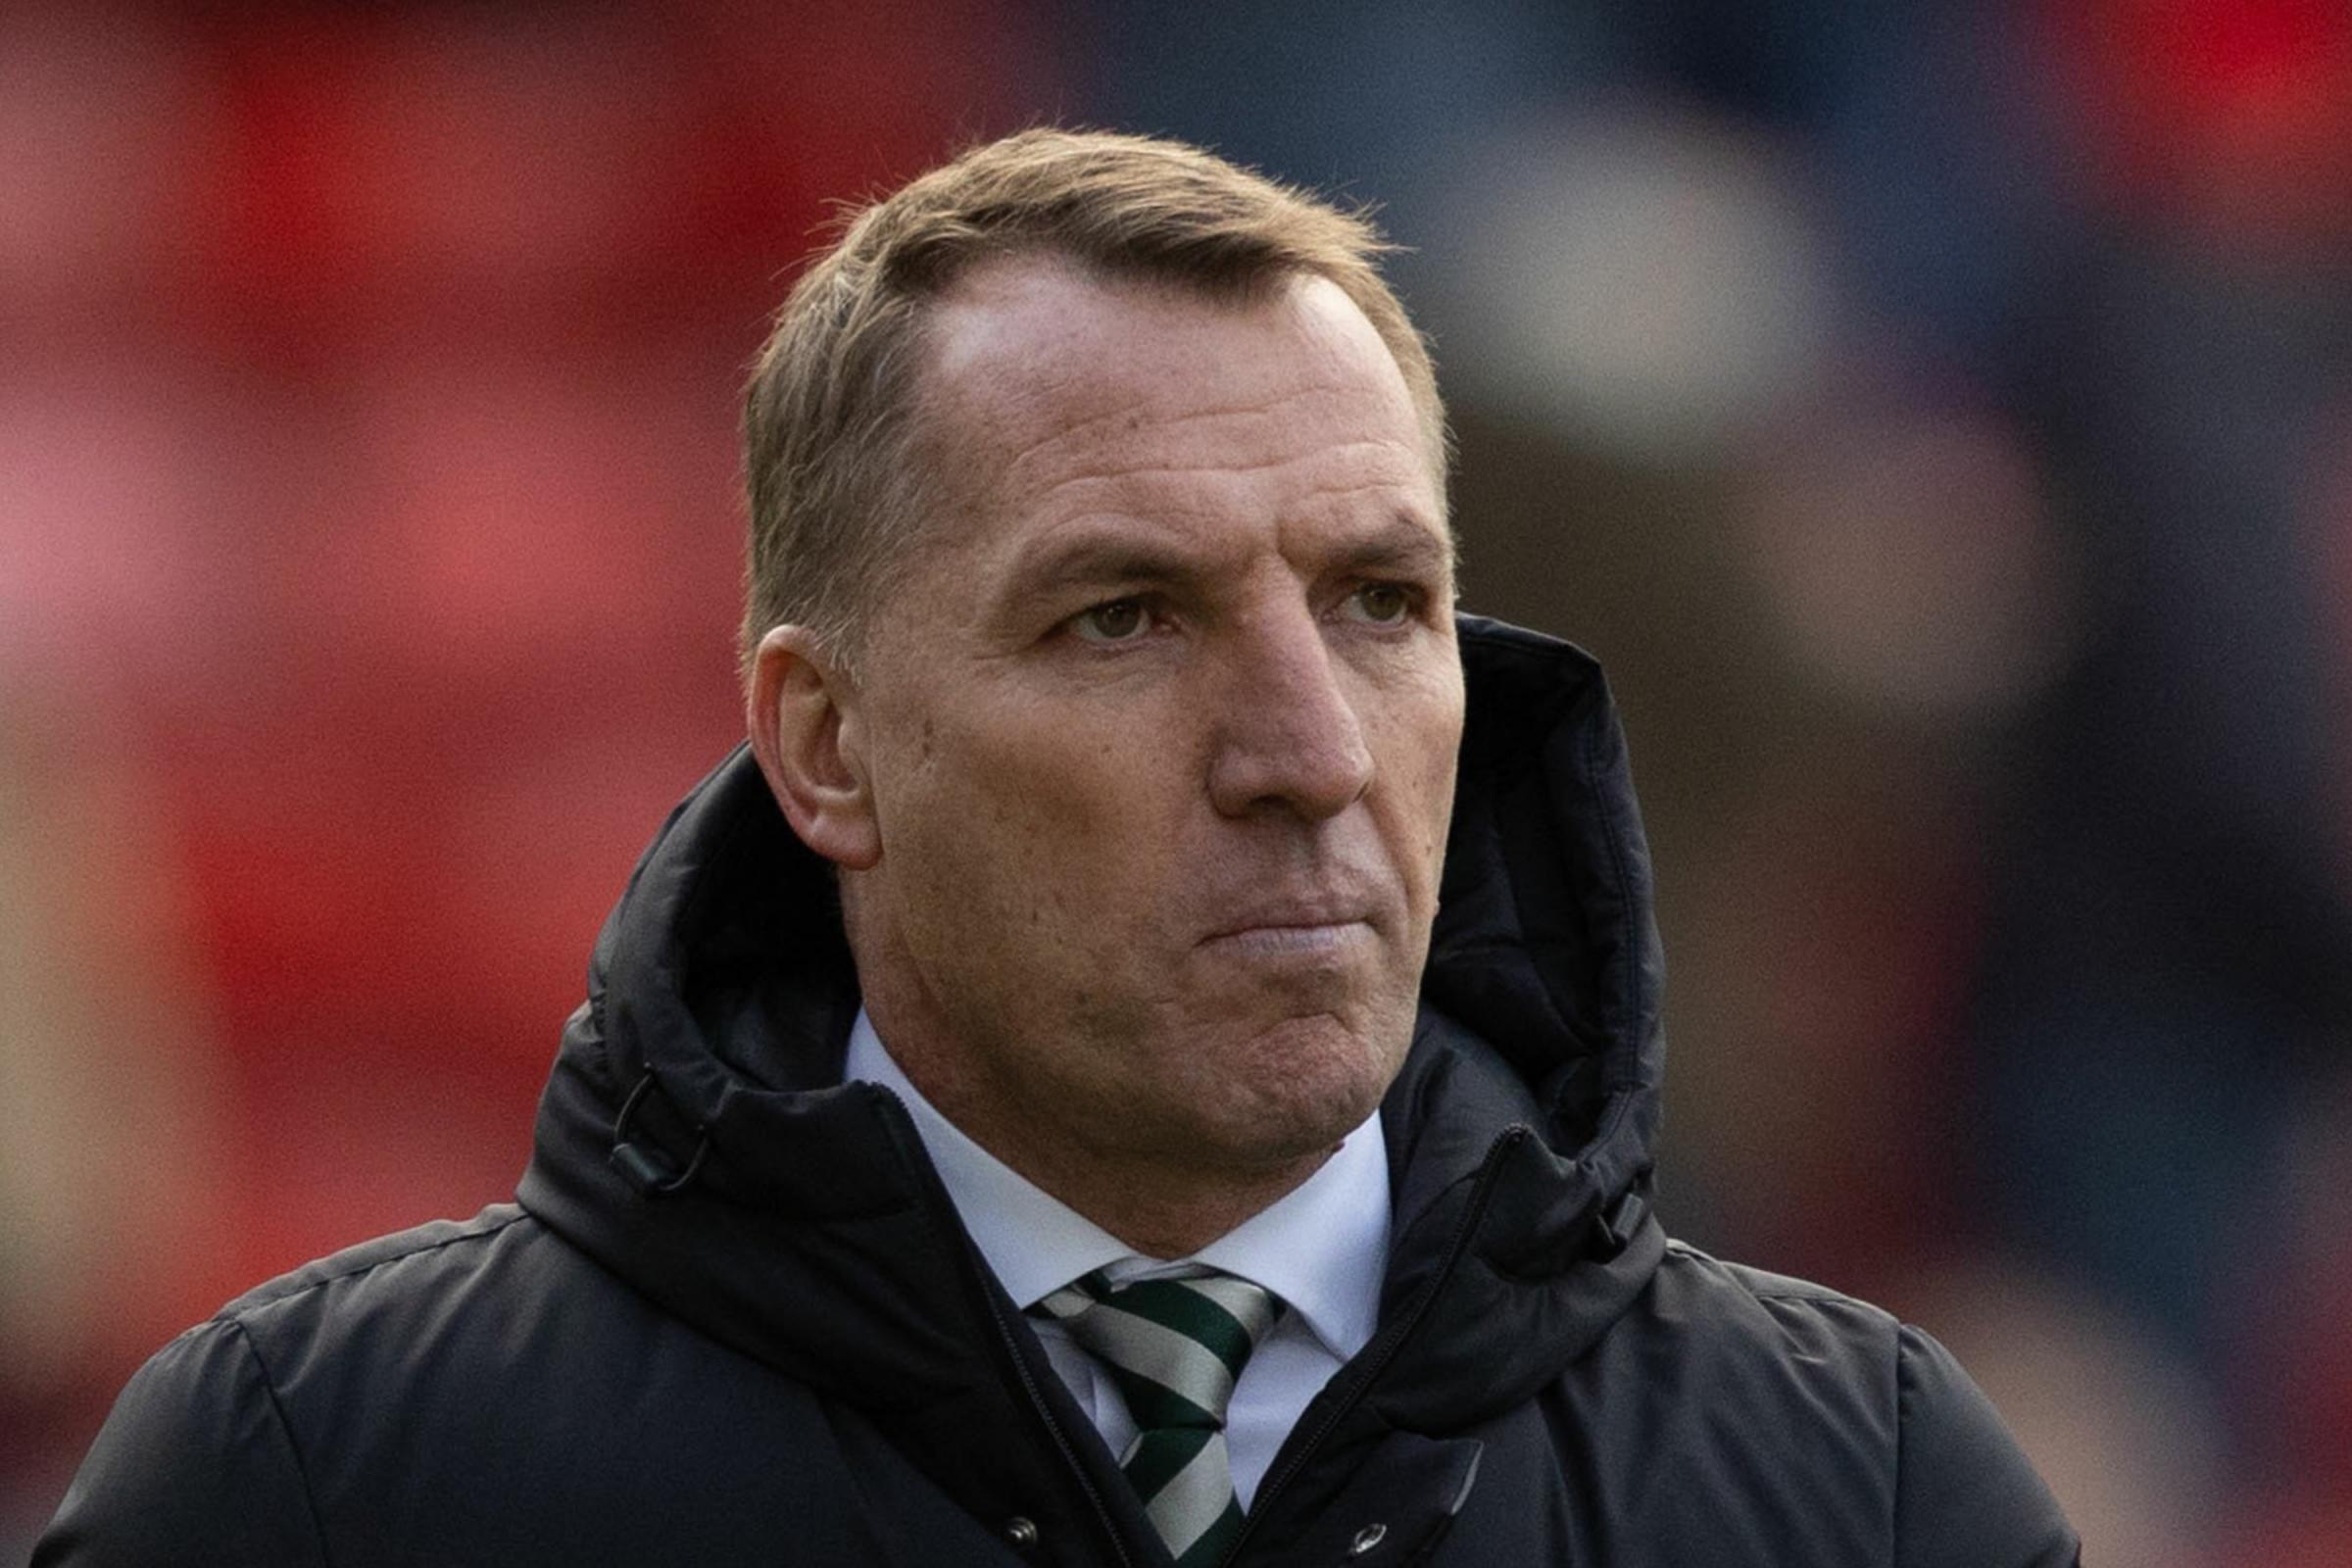 Celtic boss Brendan Rodgers issues blue card quip